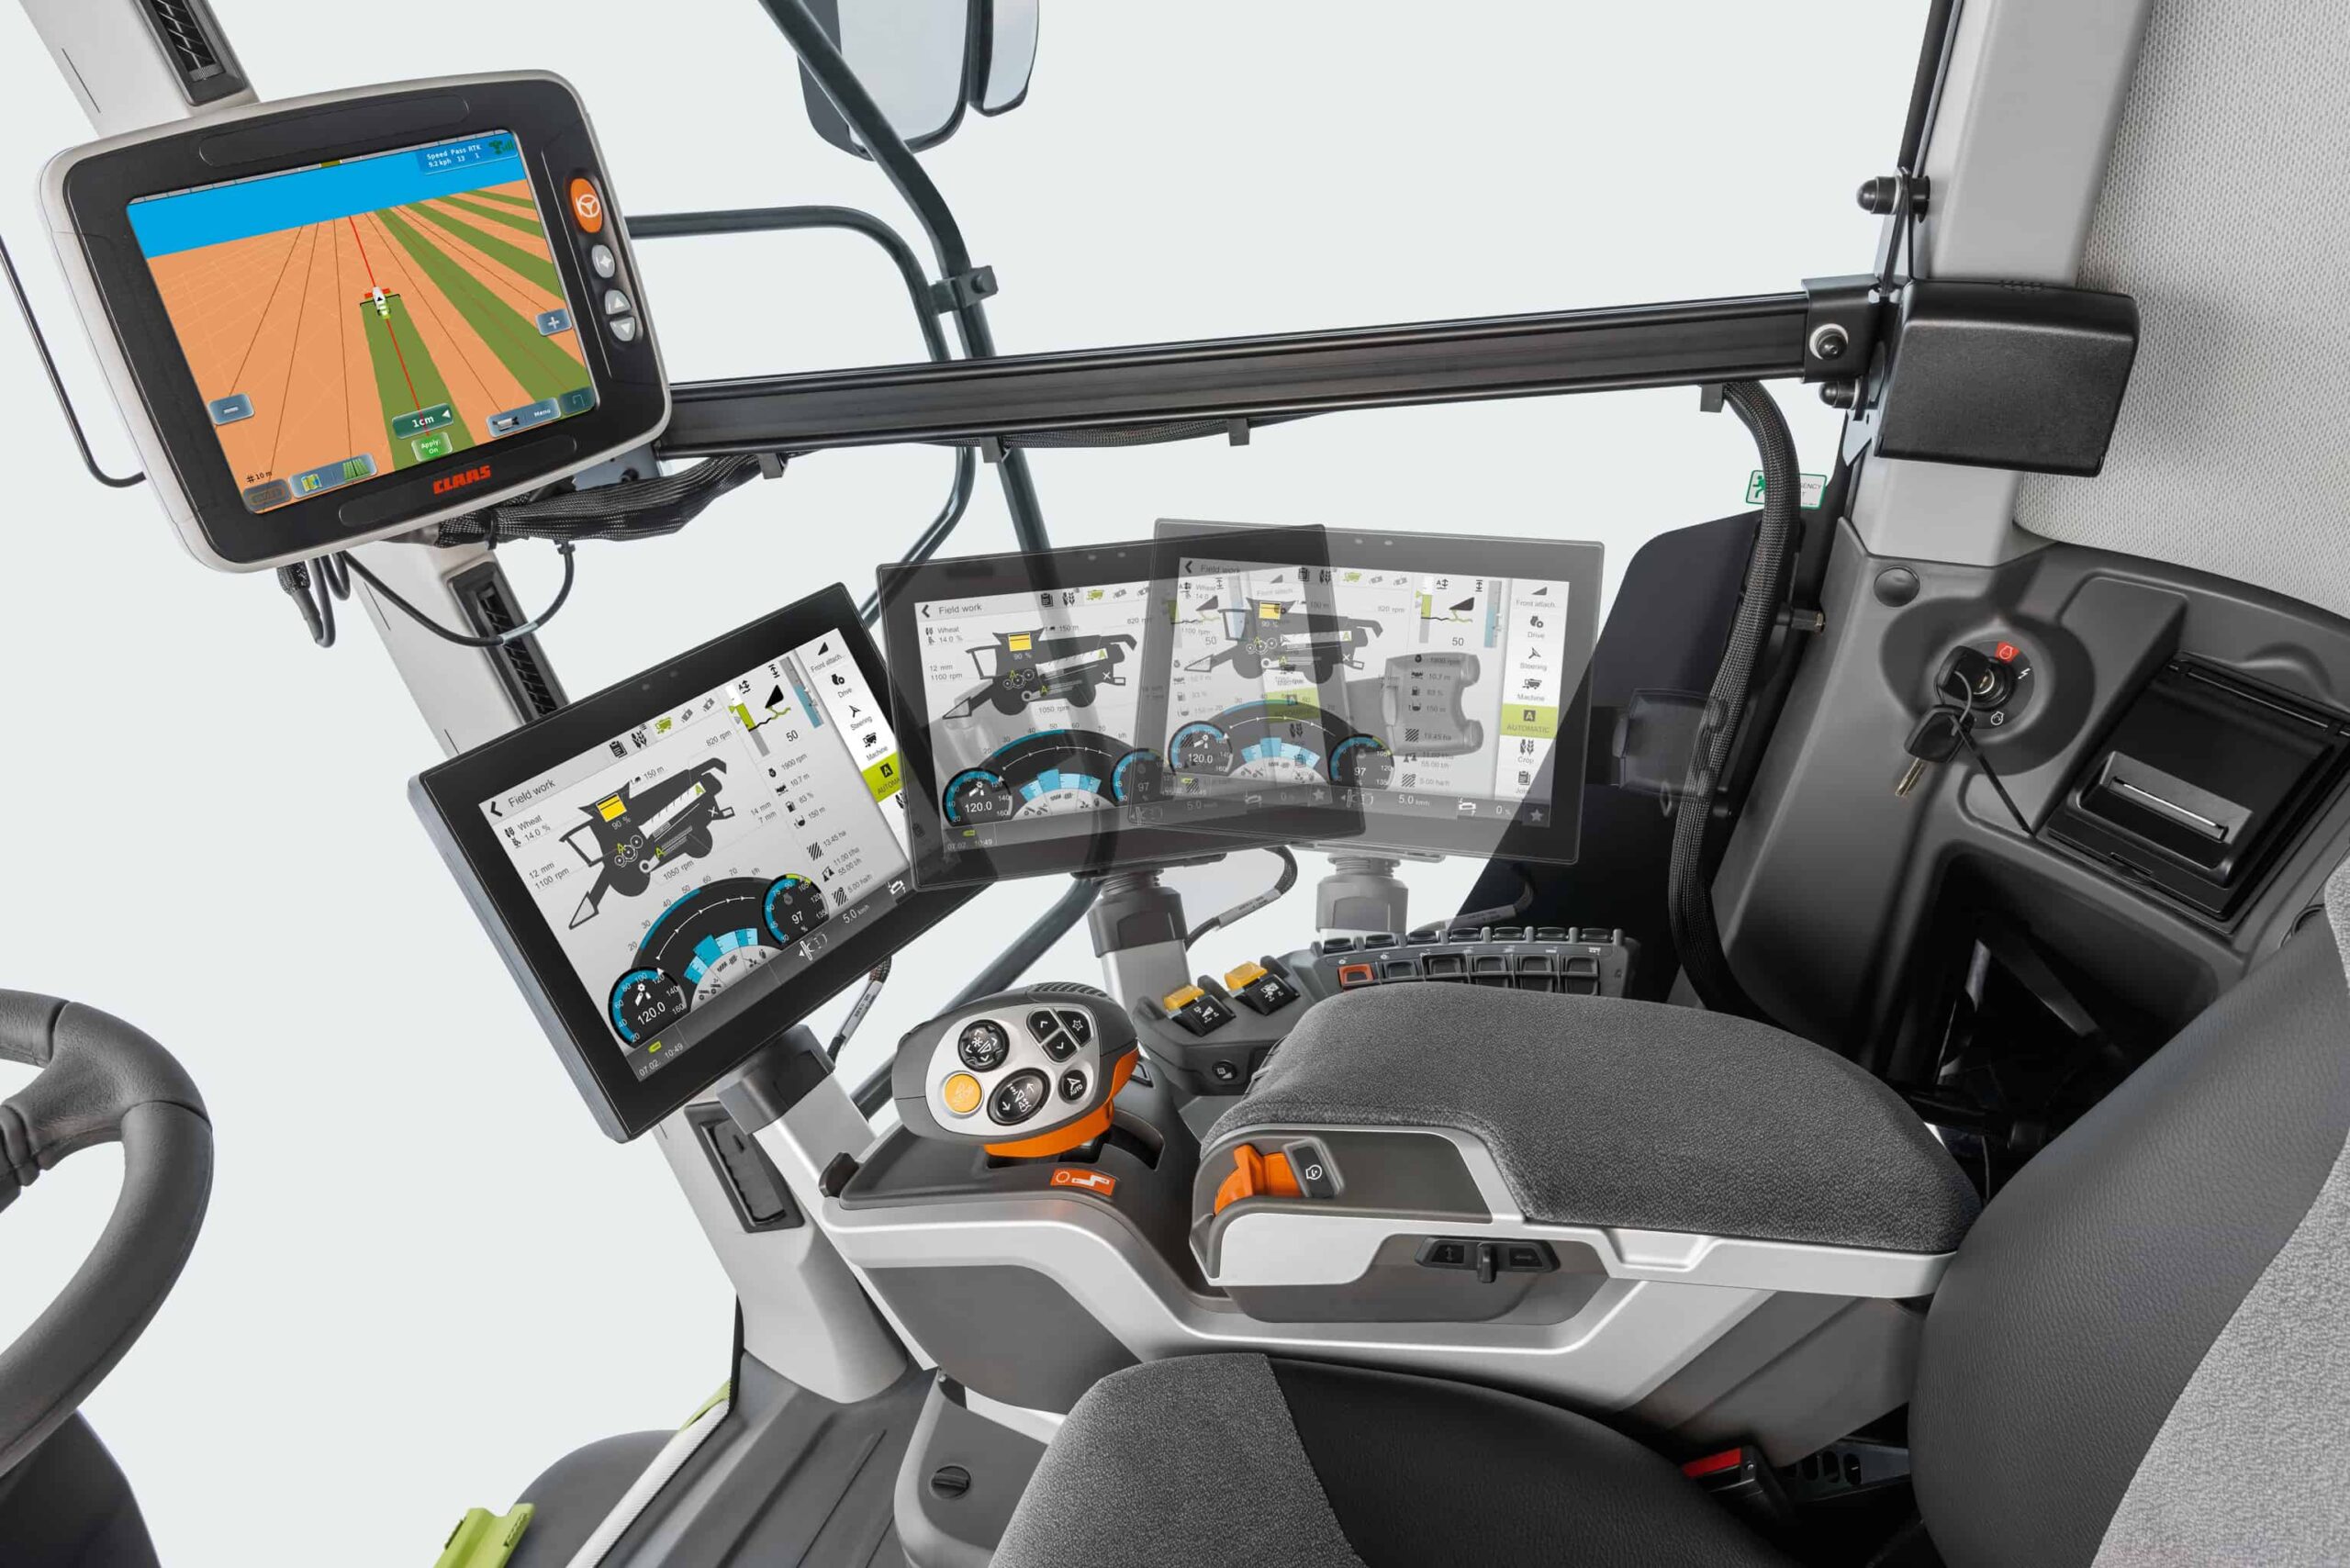 Claas launch new second generation Lexion Hybrid